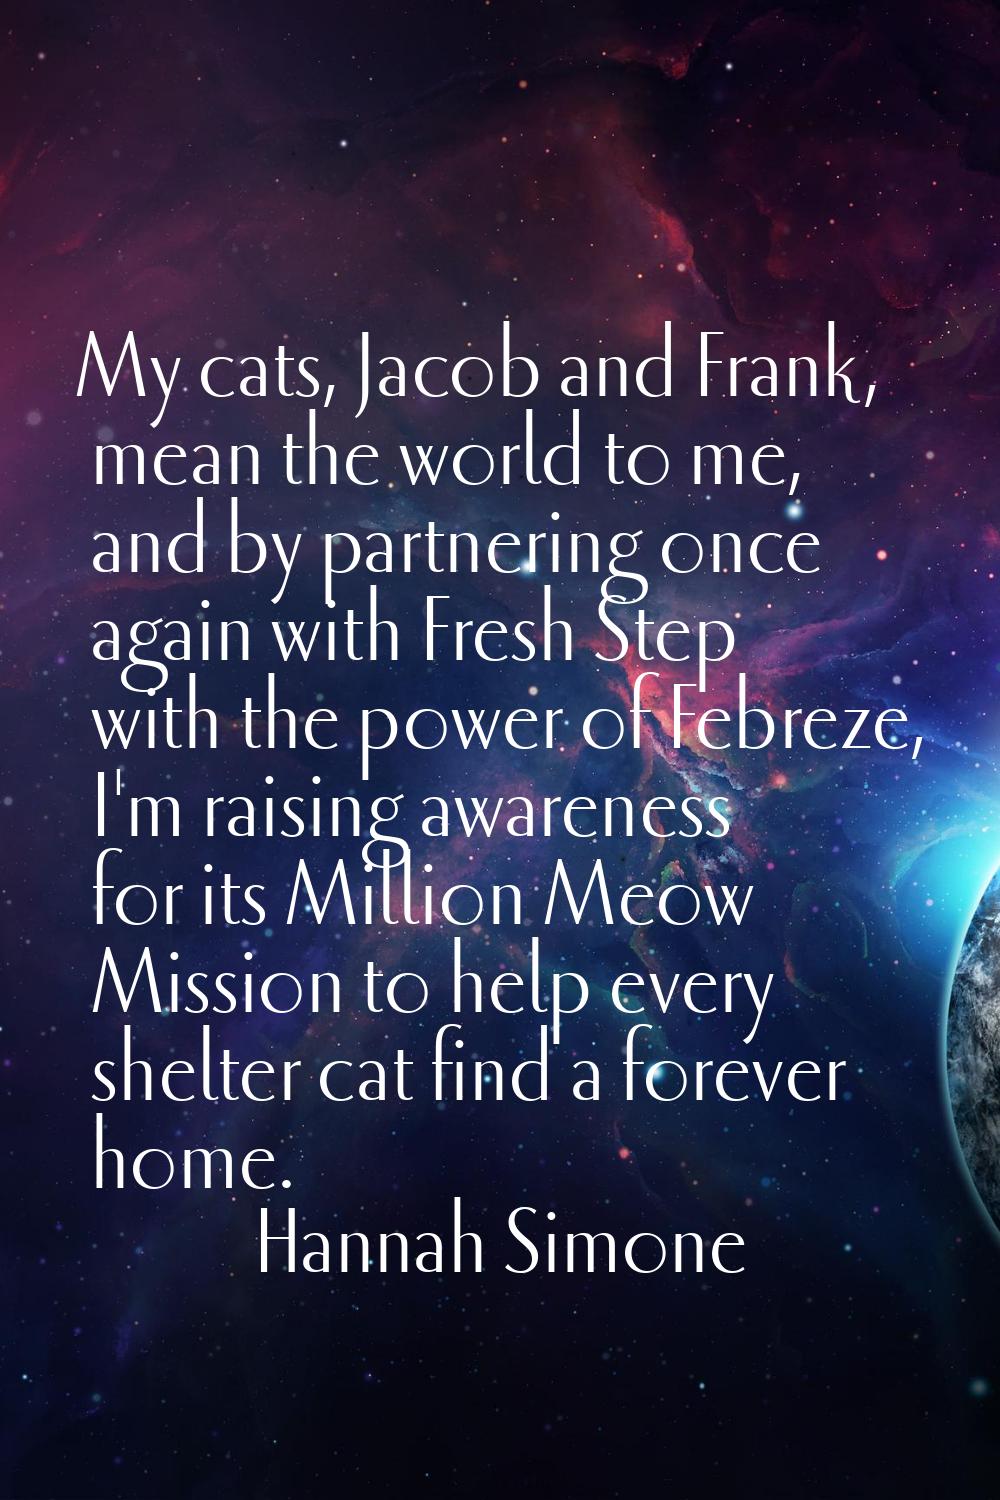 My cats, Jacob and Frank, mean the world to me, and by partnering once again with Fresh Step with t